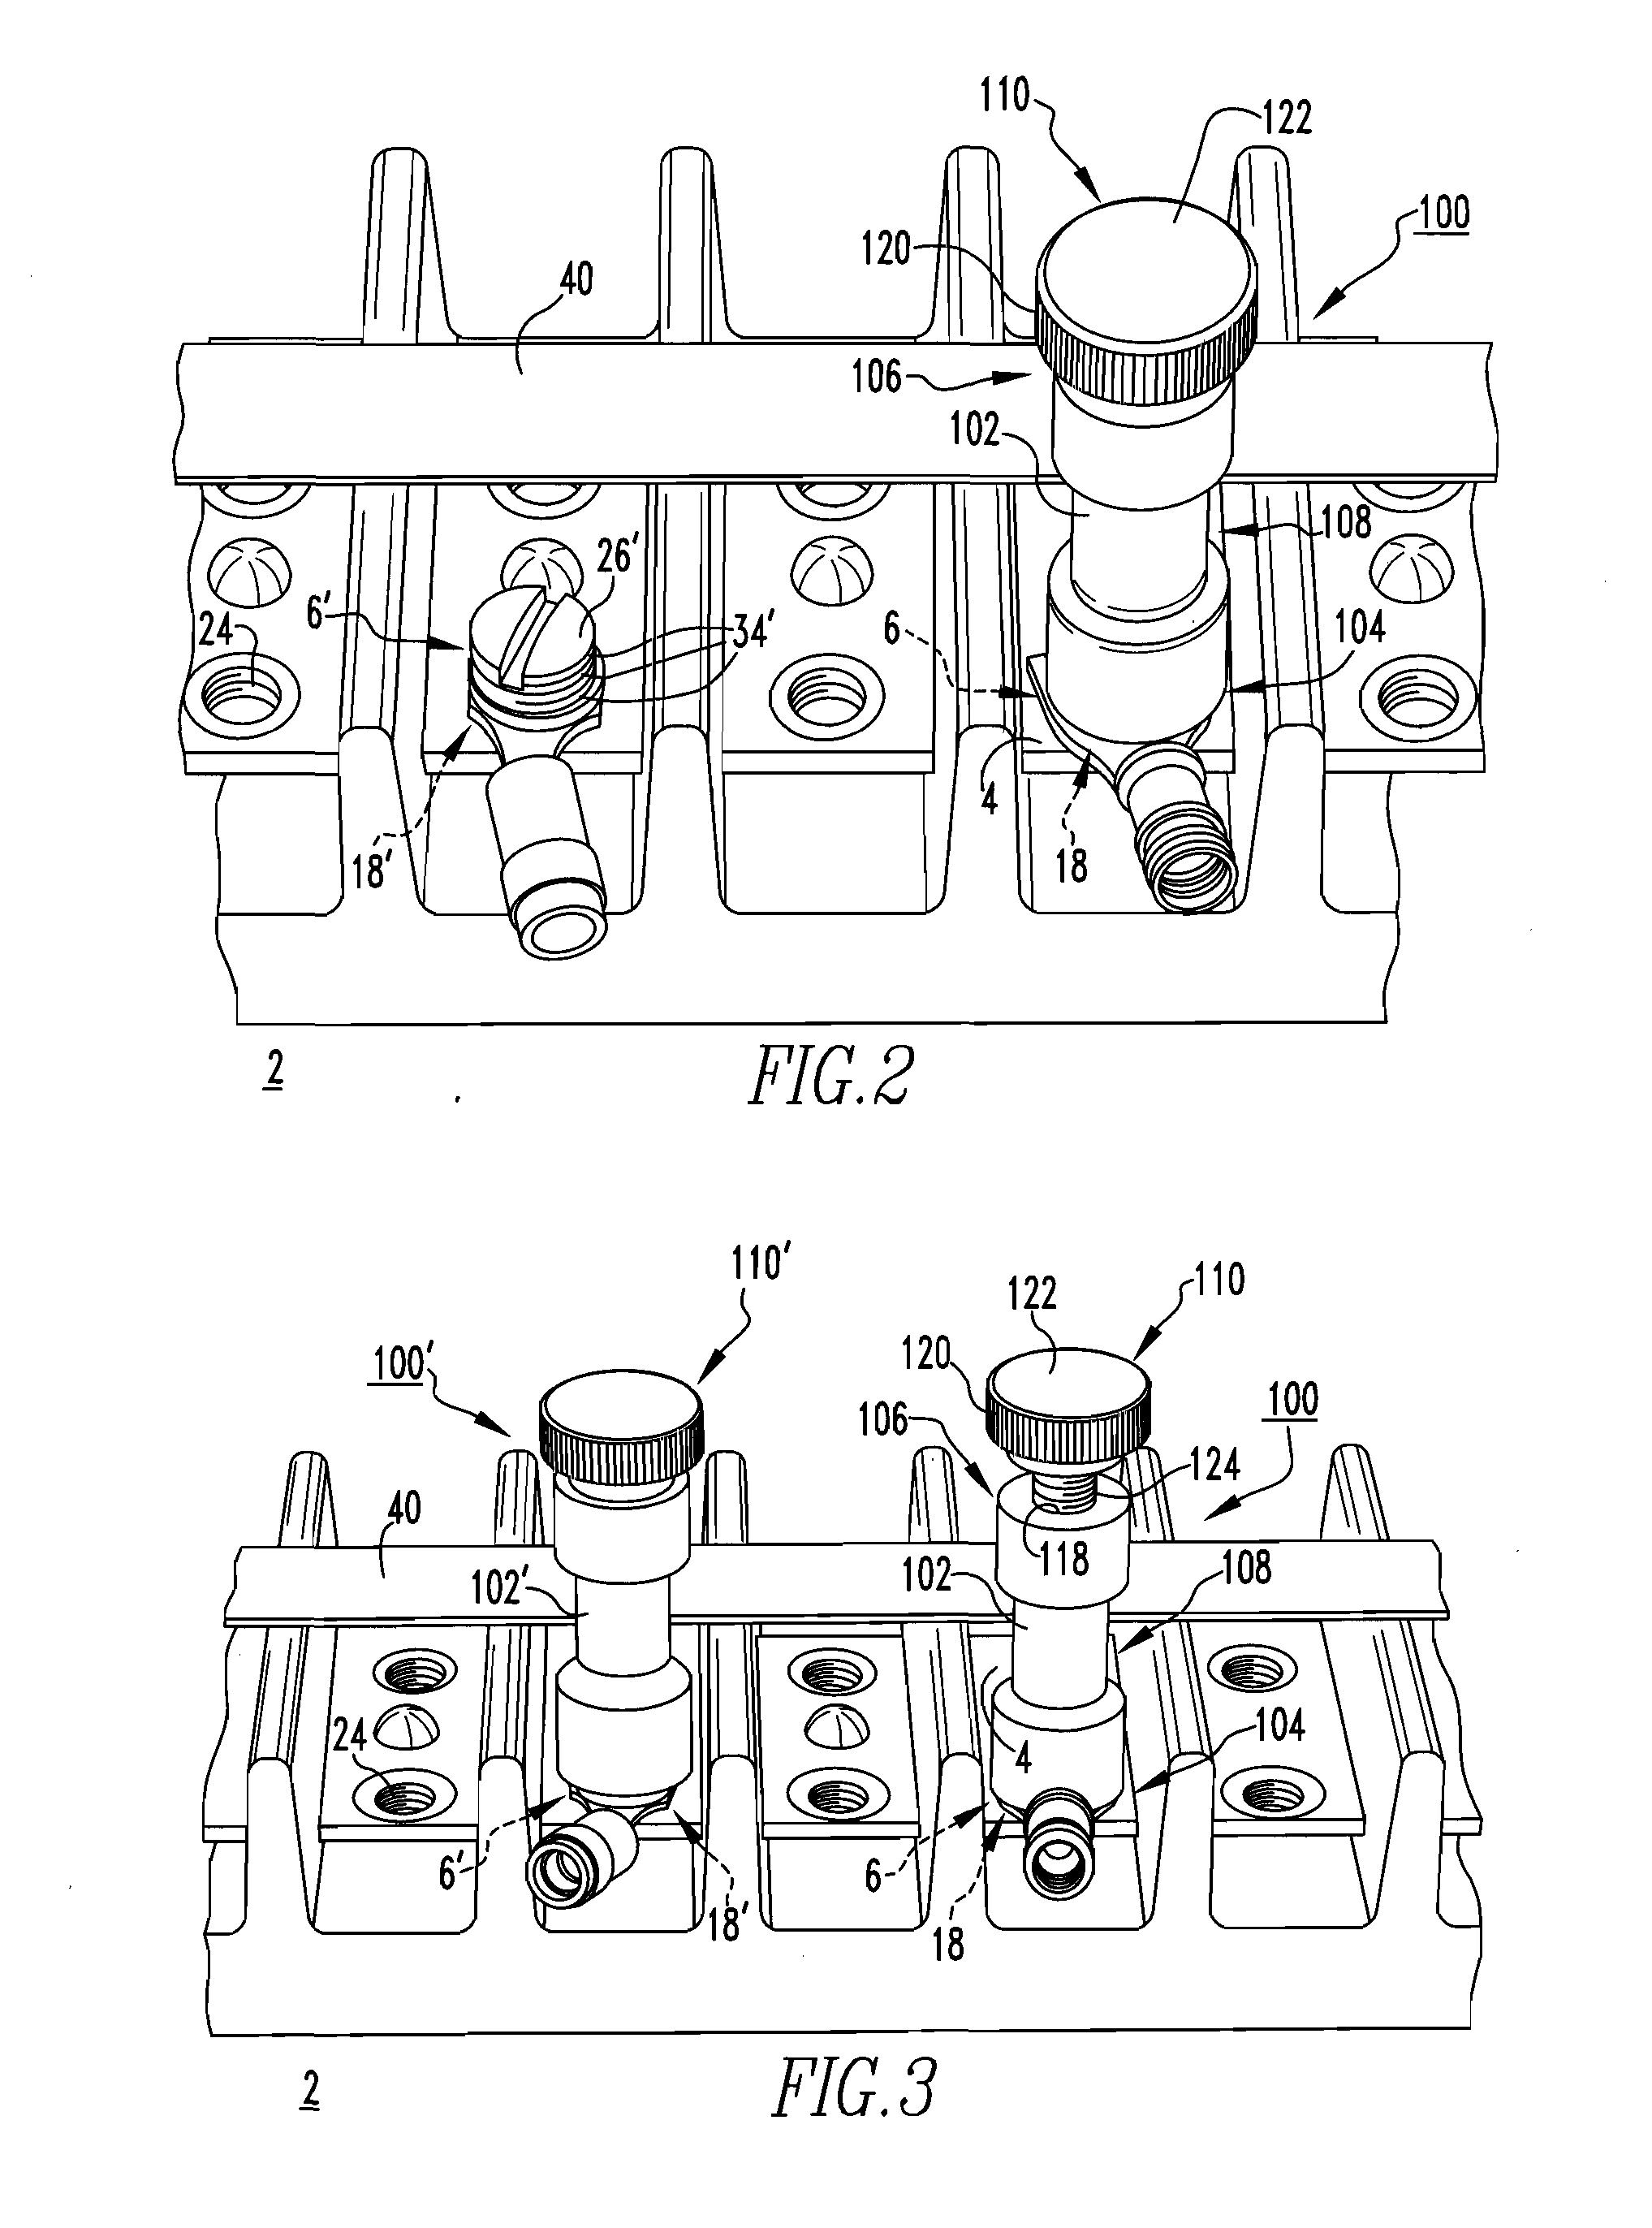 Electrical connector assembly, test lead assembly therefor, and associated method